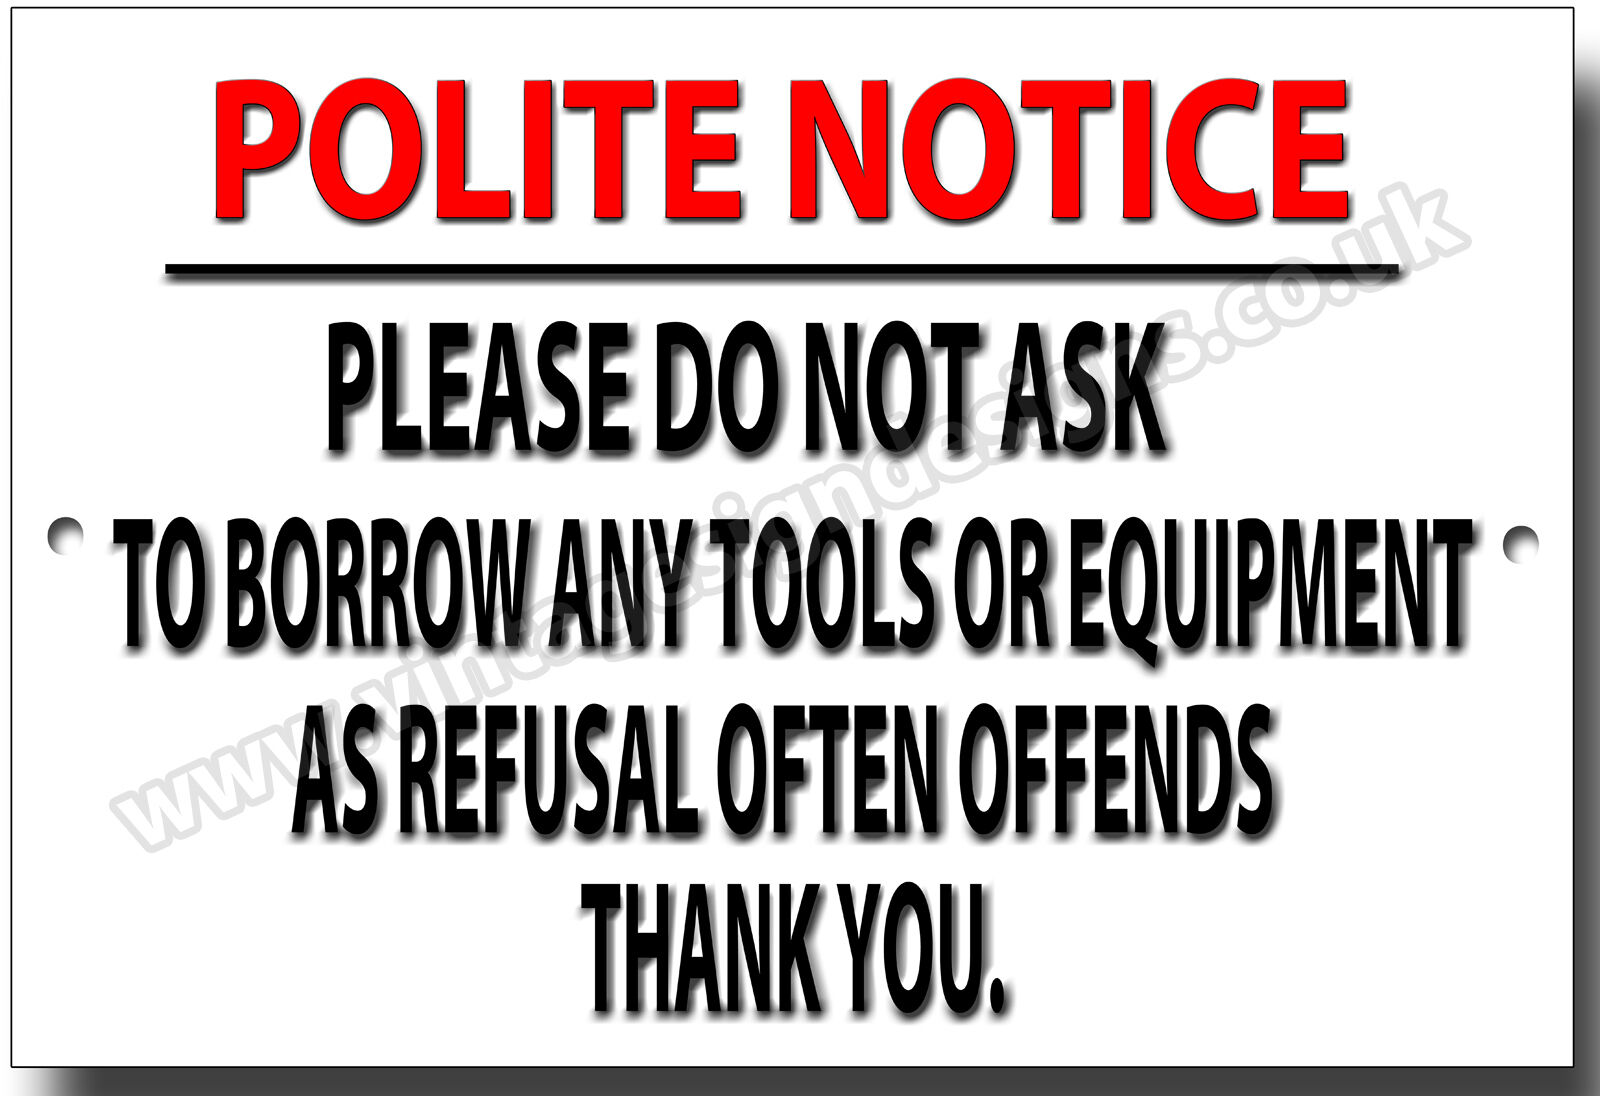 POLITE NOTICE PLEASE DO NOT ASK TO BORROW ANY TOOLS OR EQUIPMENT METAL SIGN.